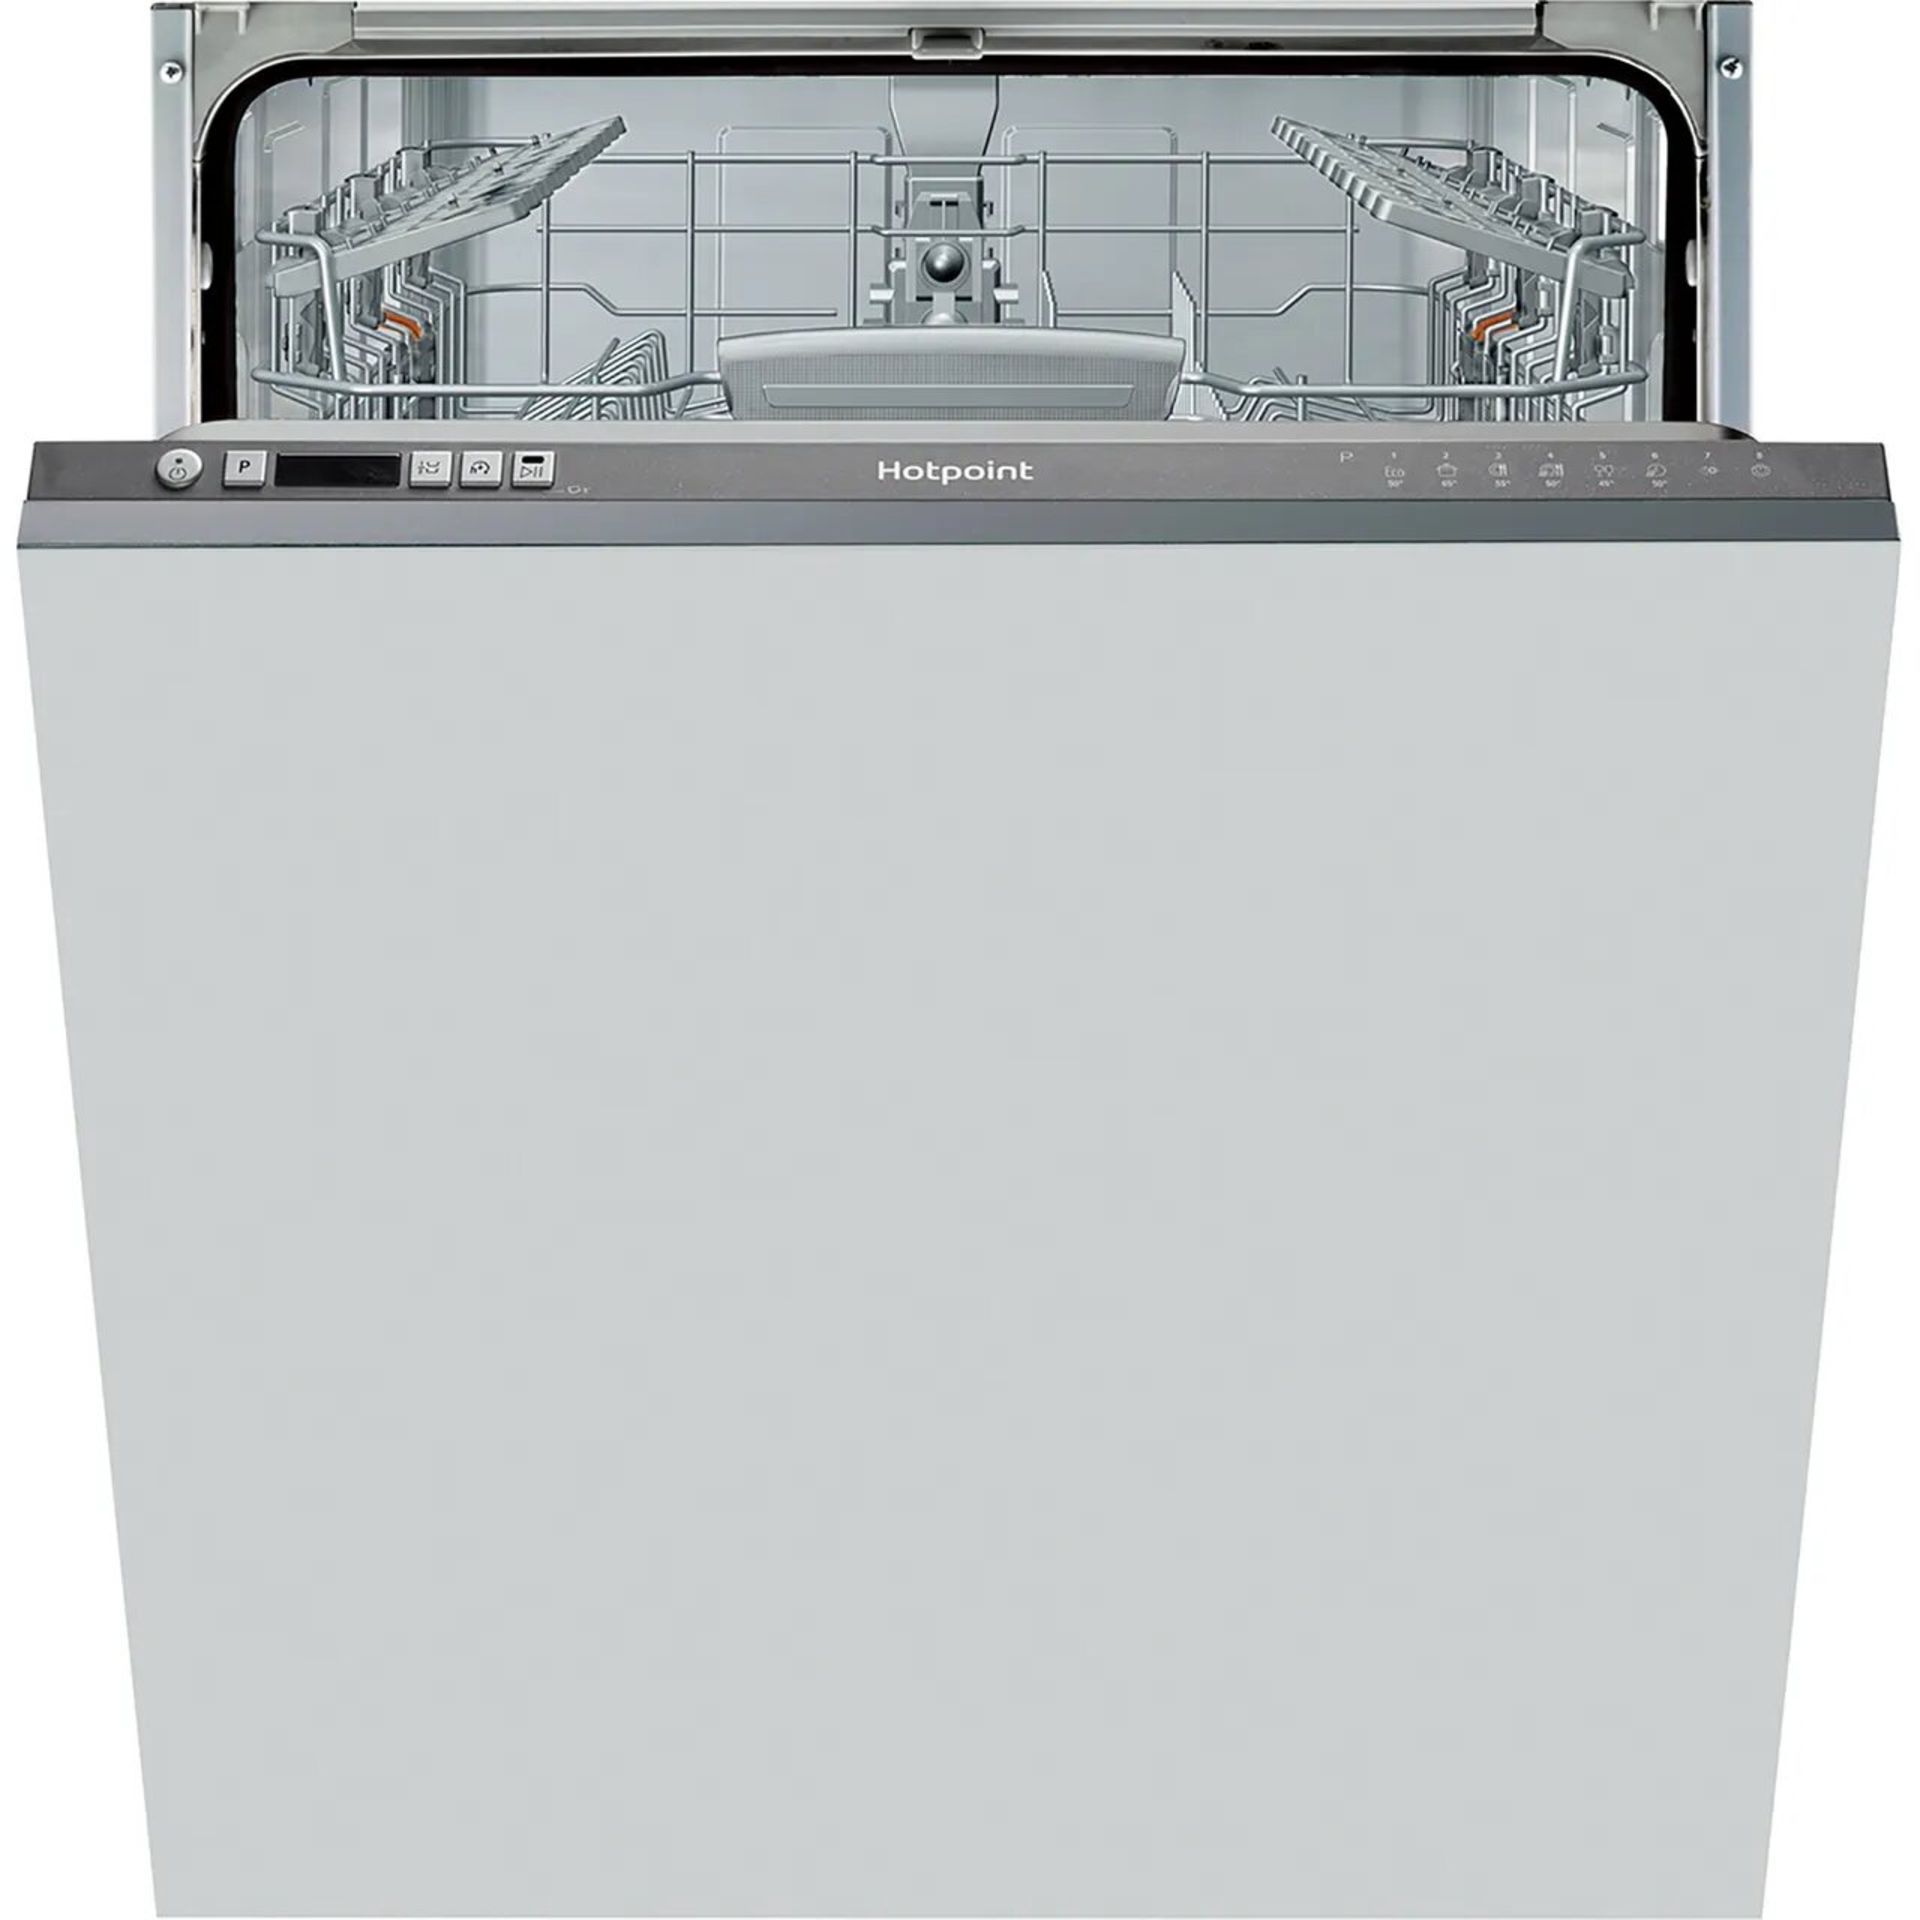 + VAT Grade B ISP £288 - Hotpoint HIC3B19CUK Fully Intergrated Dishwasher - 13 Place Settings - 30